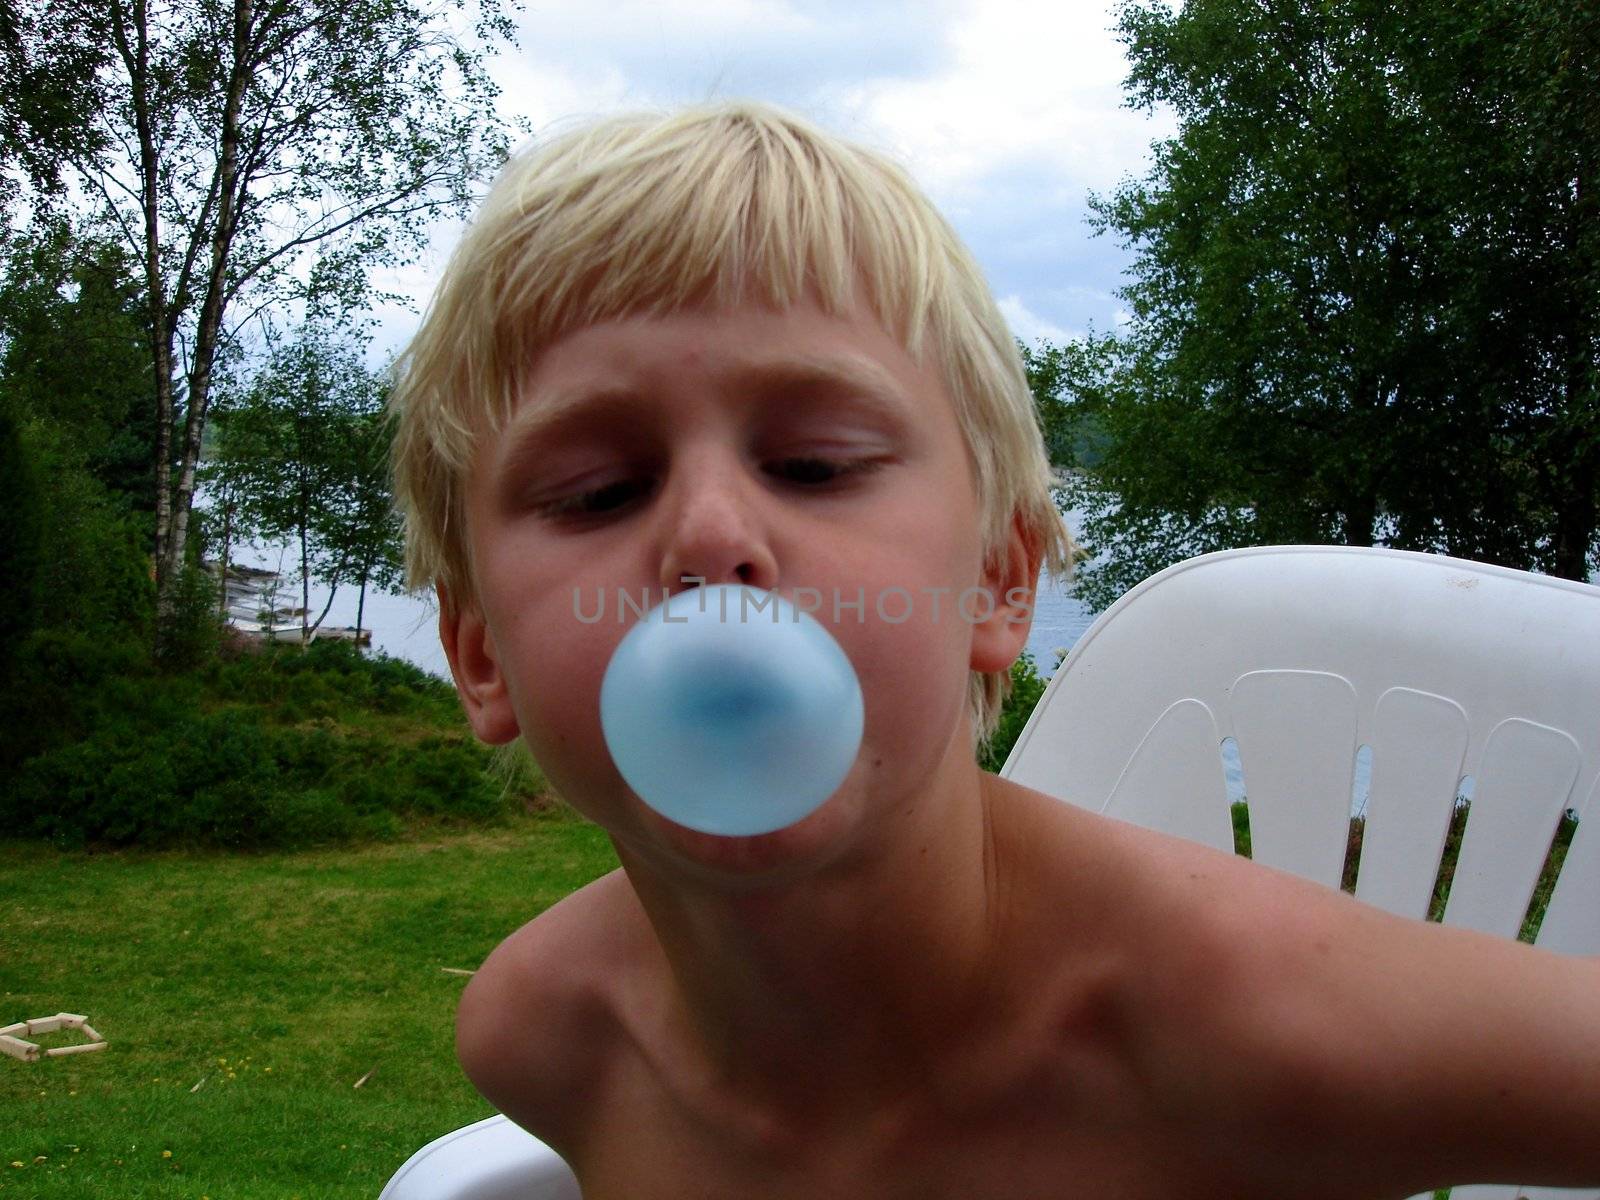 boy blowing a bubble. Please note: No negative use allowed.